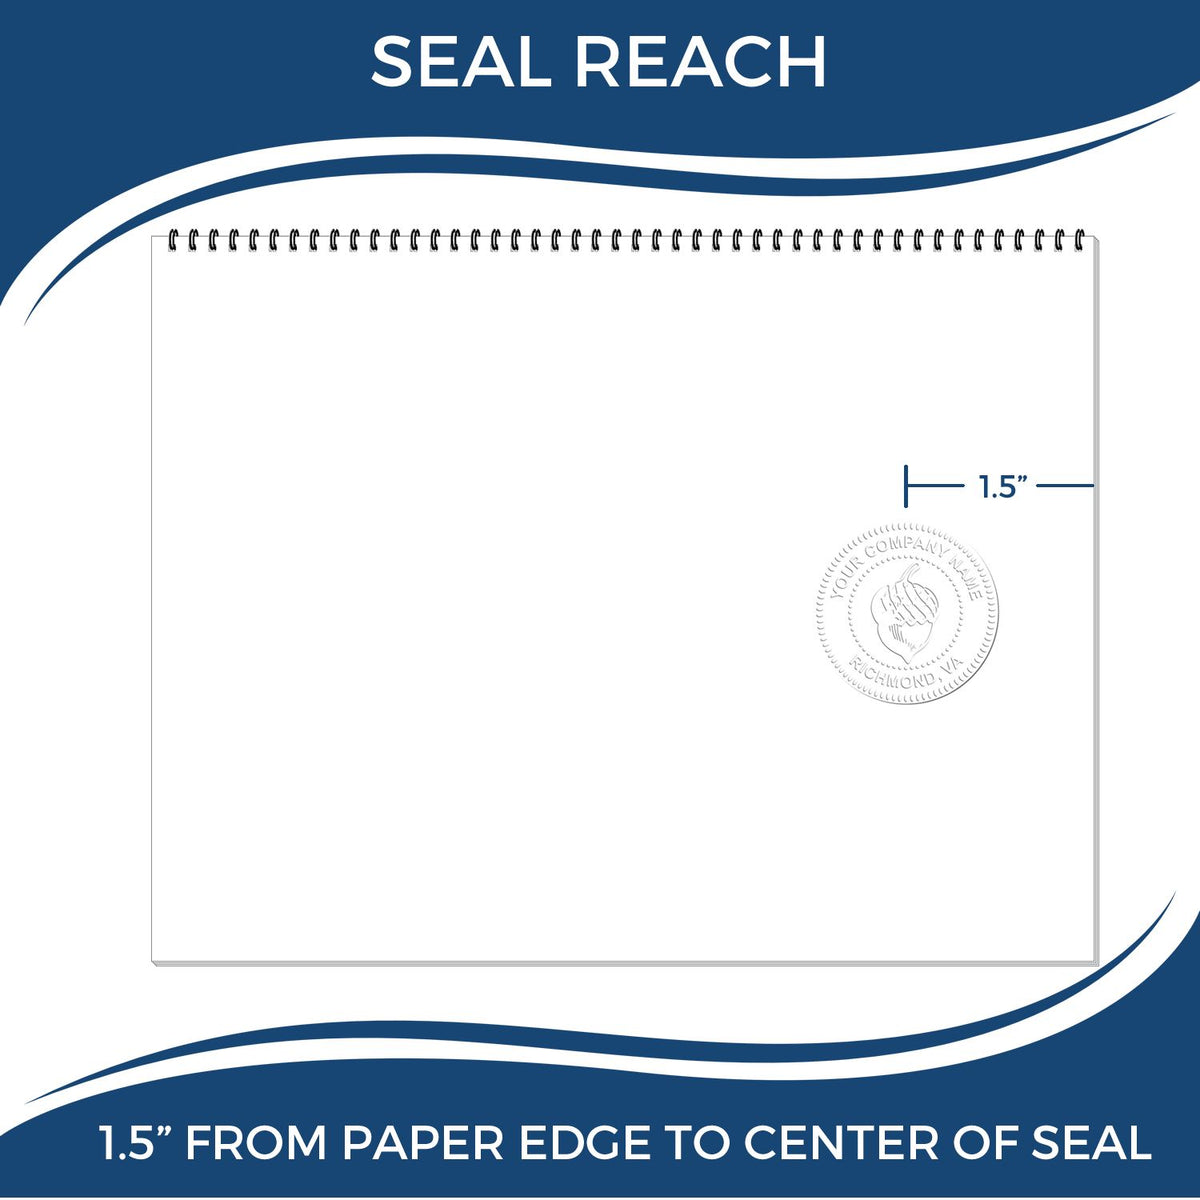 An infographic showing the seal reach which is represented by a ruler and a miniature seal image of the Hybrid South Carolina Geologist Seal